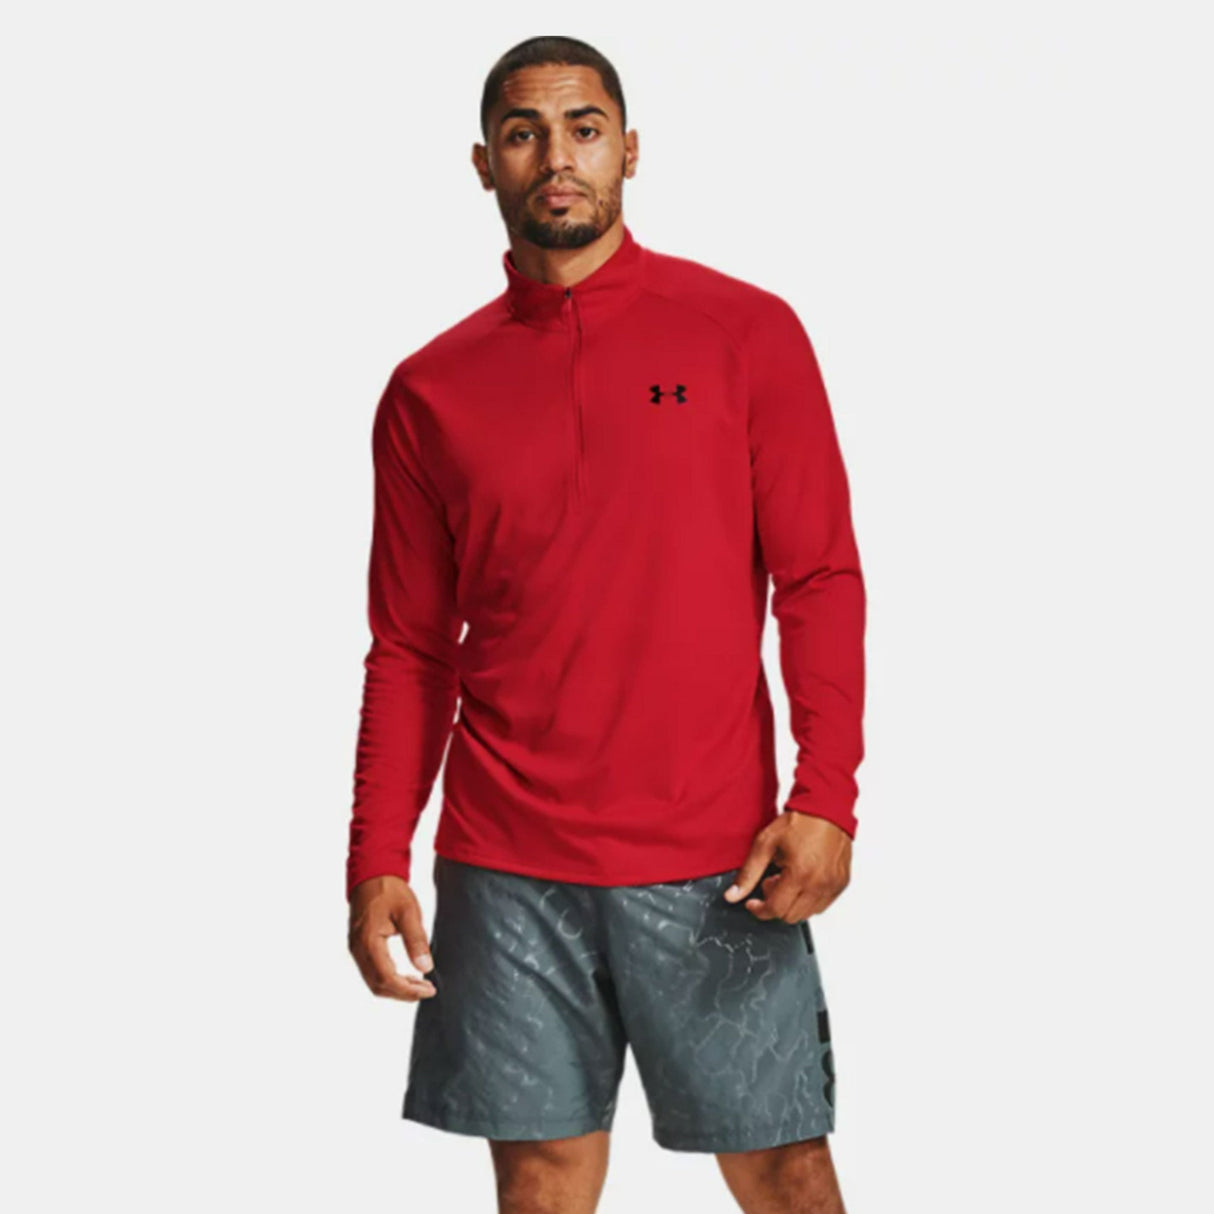 Under Armour Tech 1/2 Zip Top - Red |T-Shirt | Under Armour | Absolute Rugby